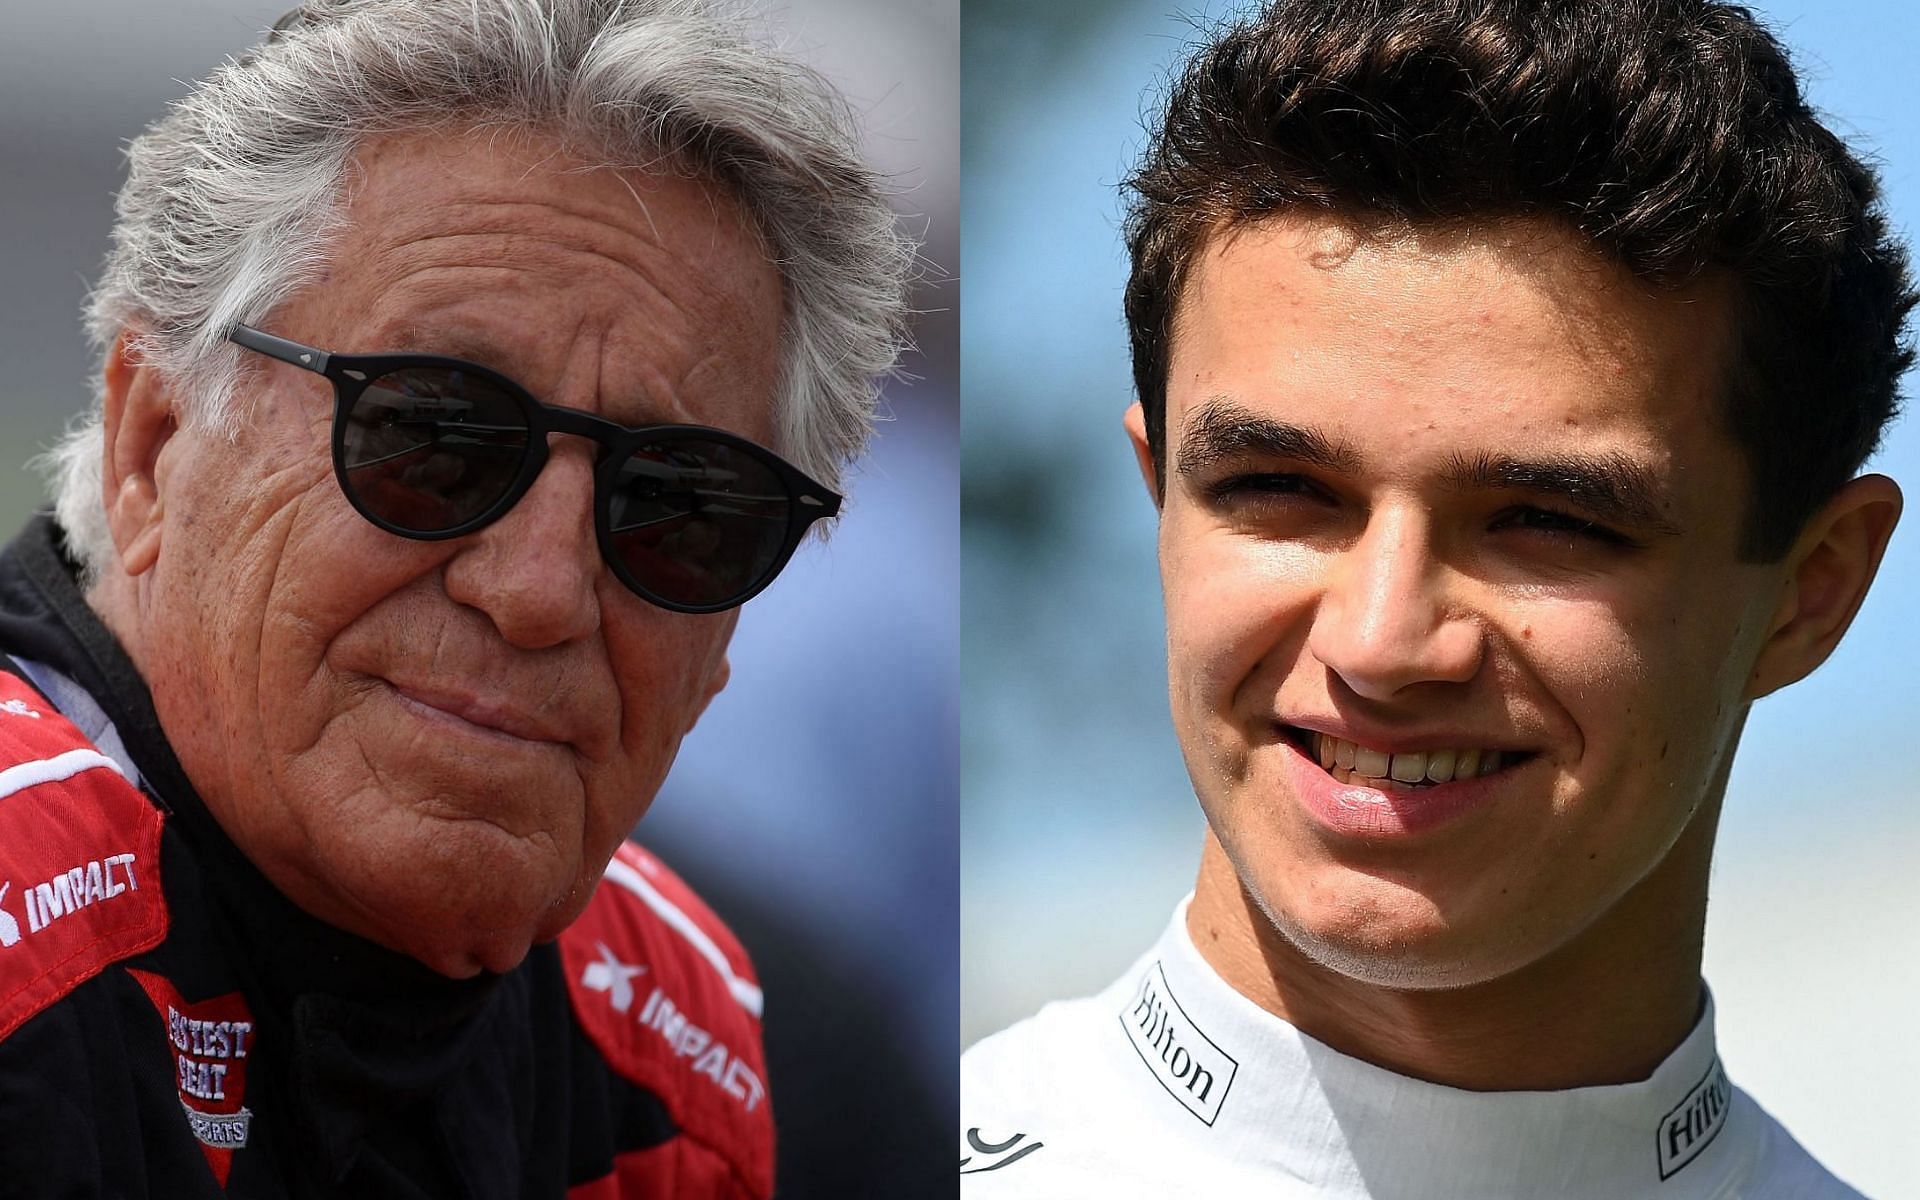 Mario Andretti (left) expects Lando Norris (right) to shine in 2022